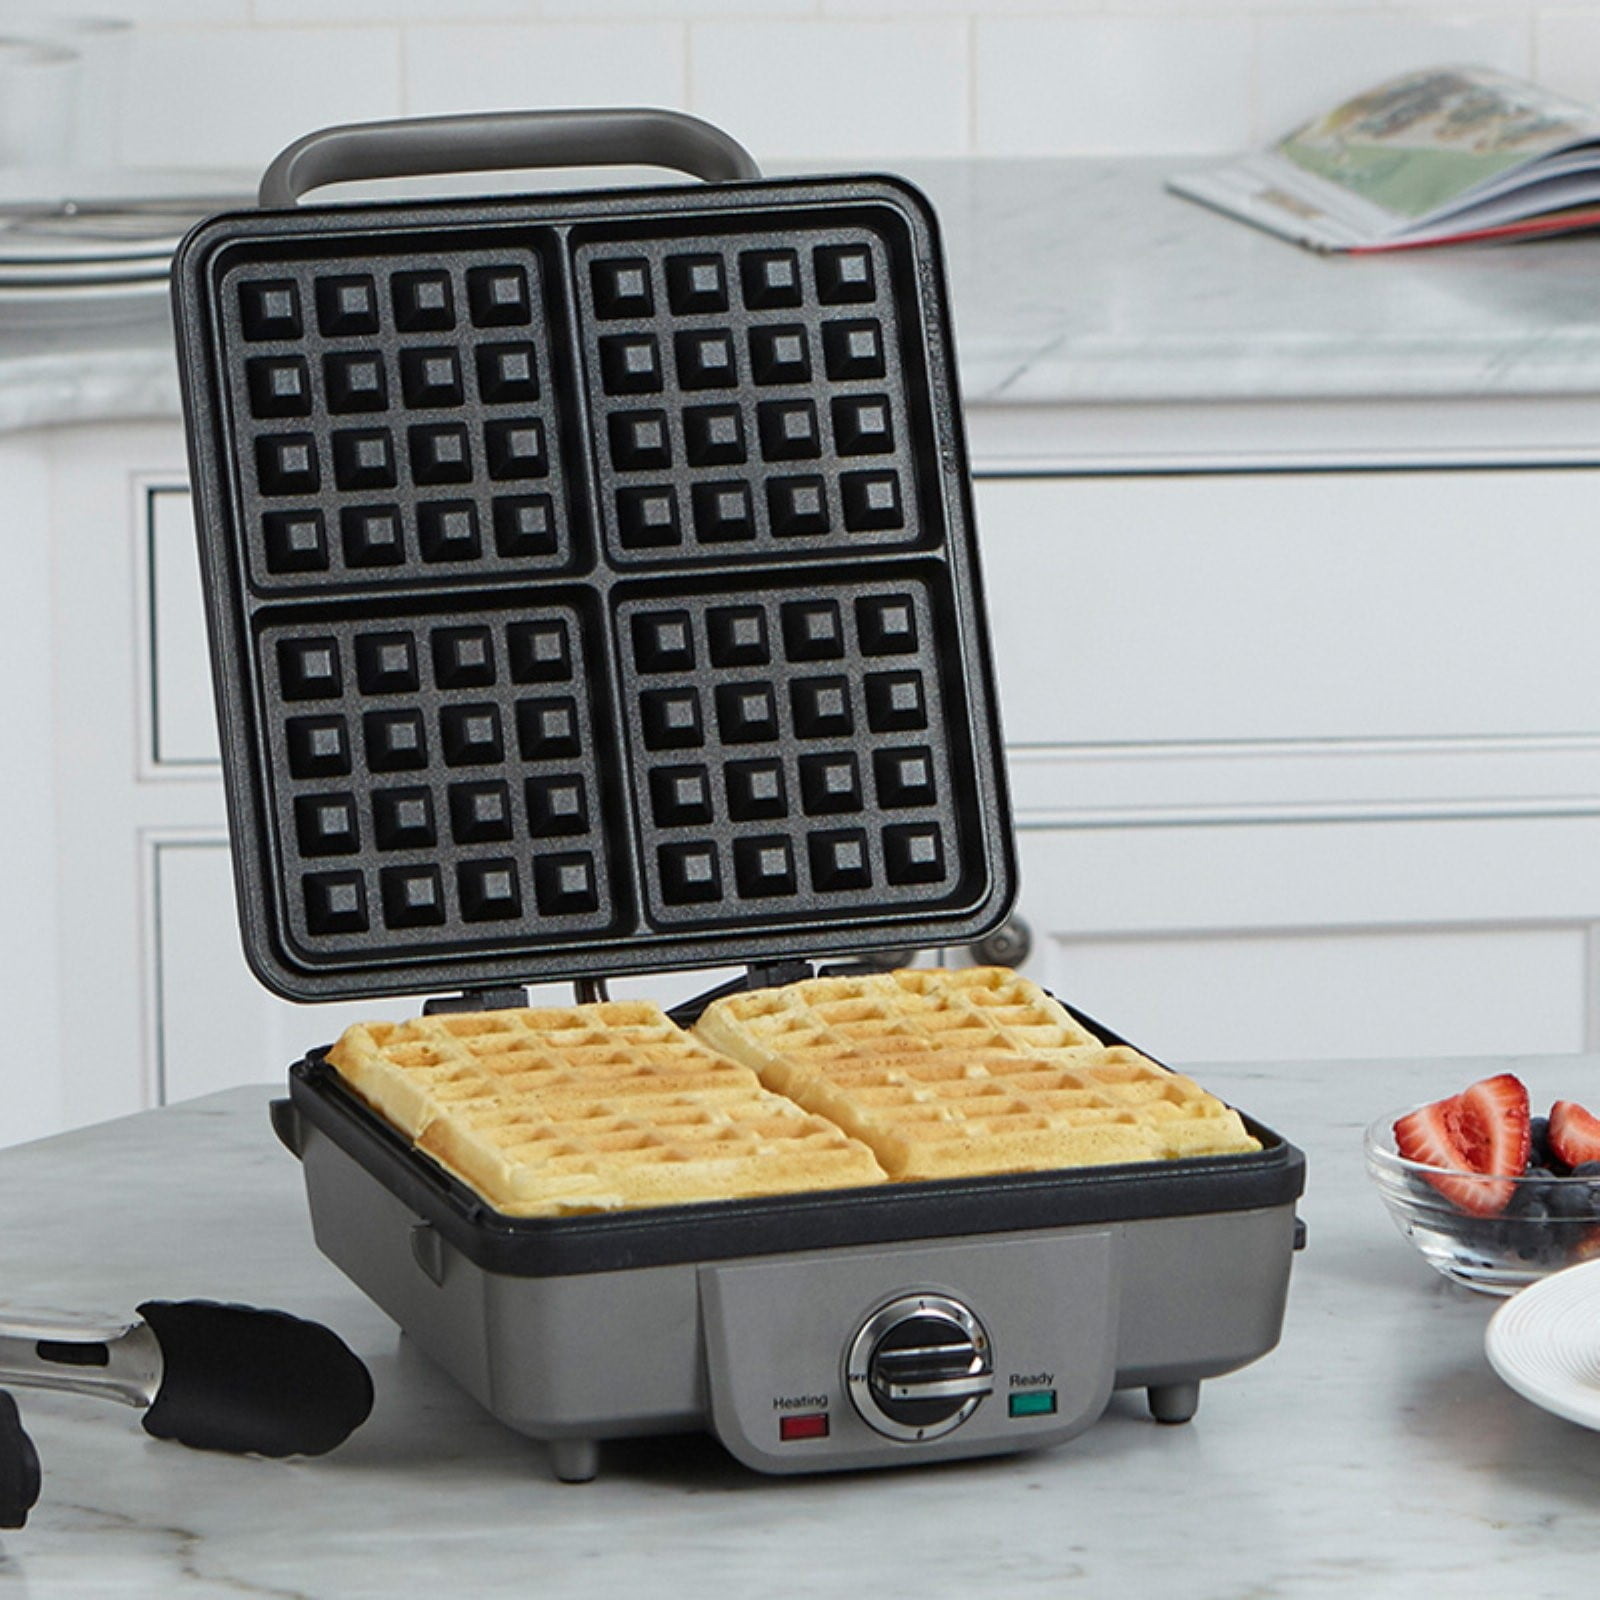 601966-GQ502YA Black for sale online KRUPS GQ502D51 Stainless Steel Belgian Waffle Maker with Removable Plates 4 Slices 